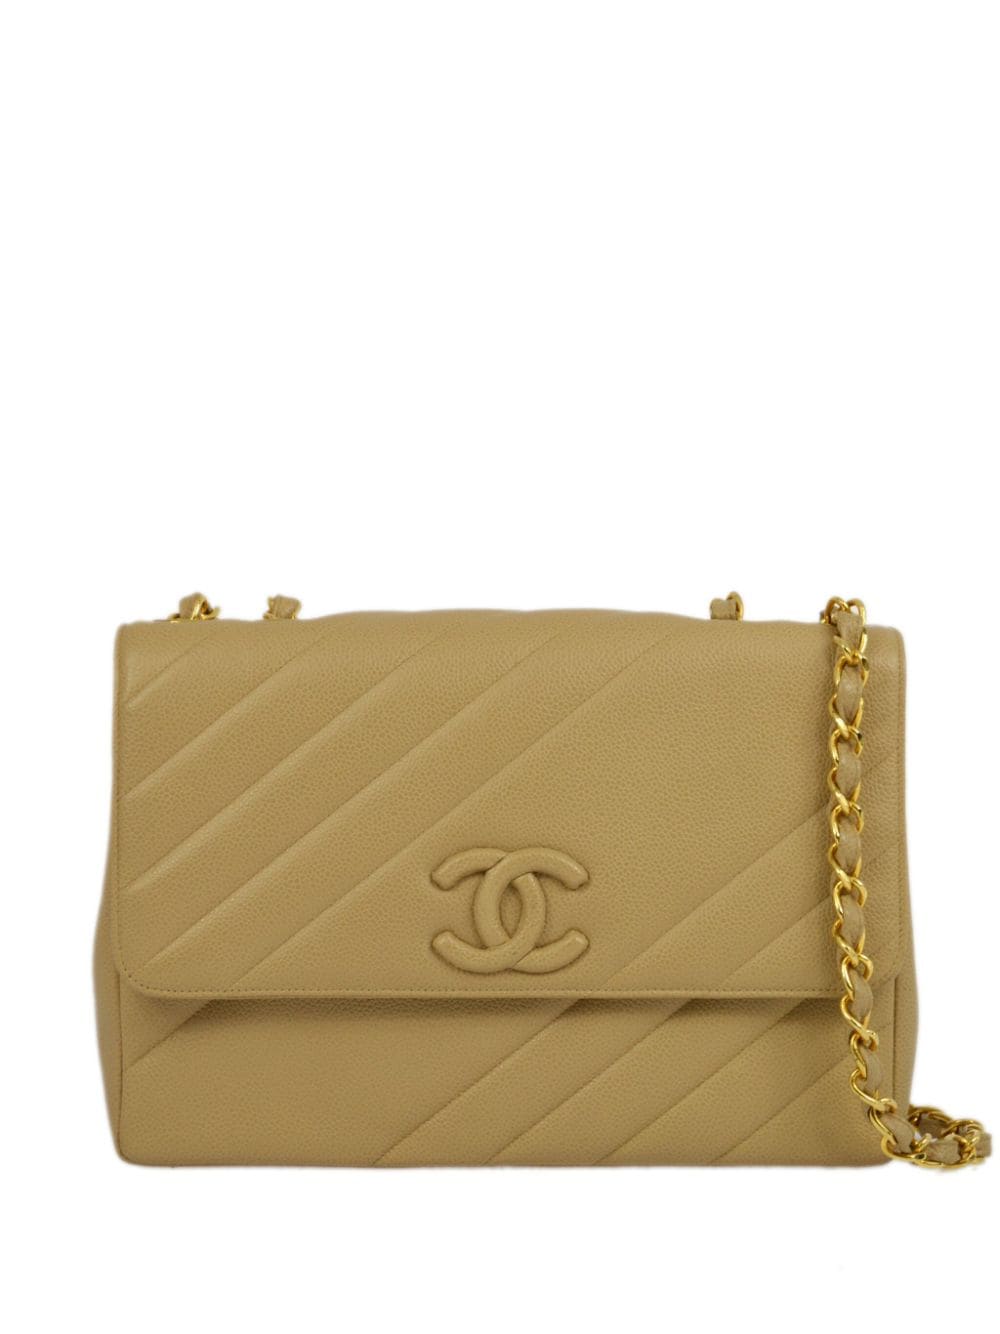 Pre-owned Chanel 1995 Jumbo Classic Flap Shoulder Bag In Neutrals